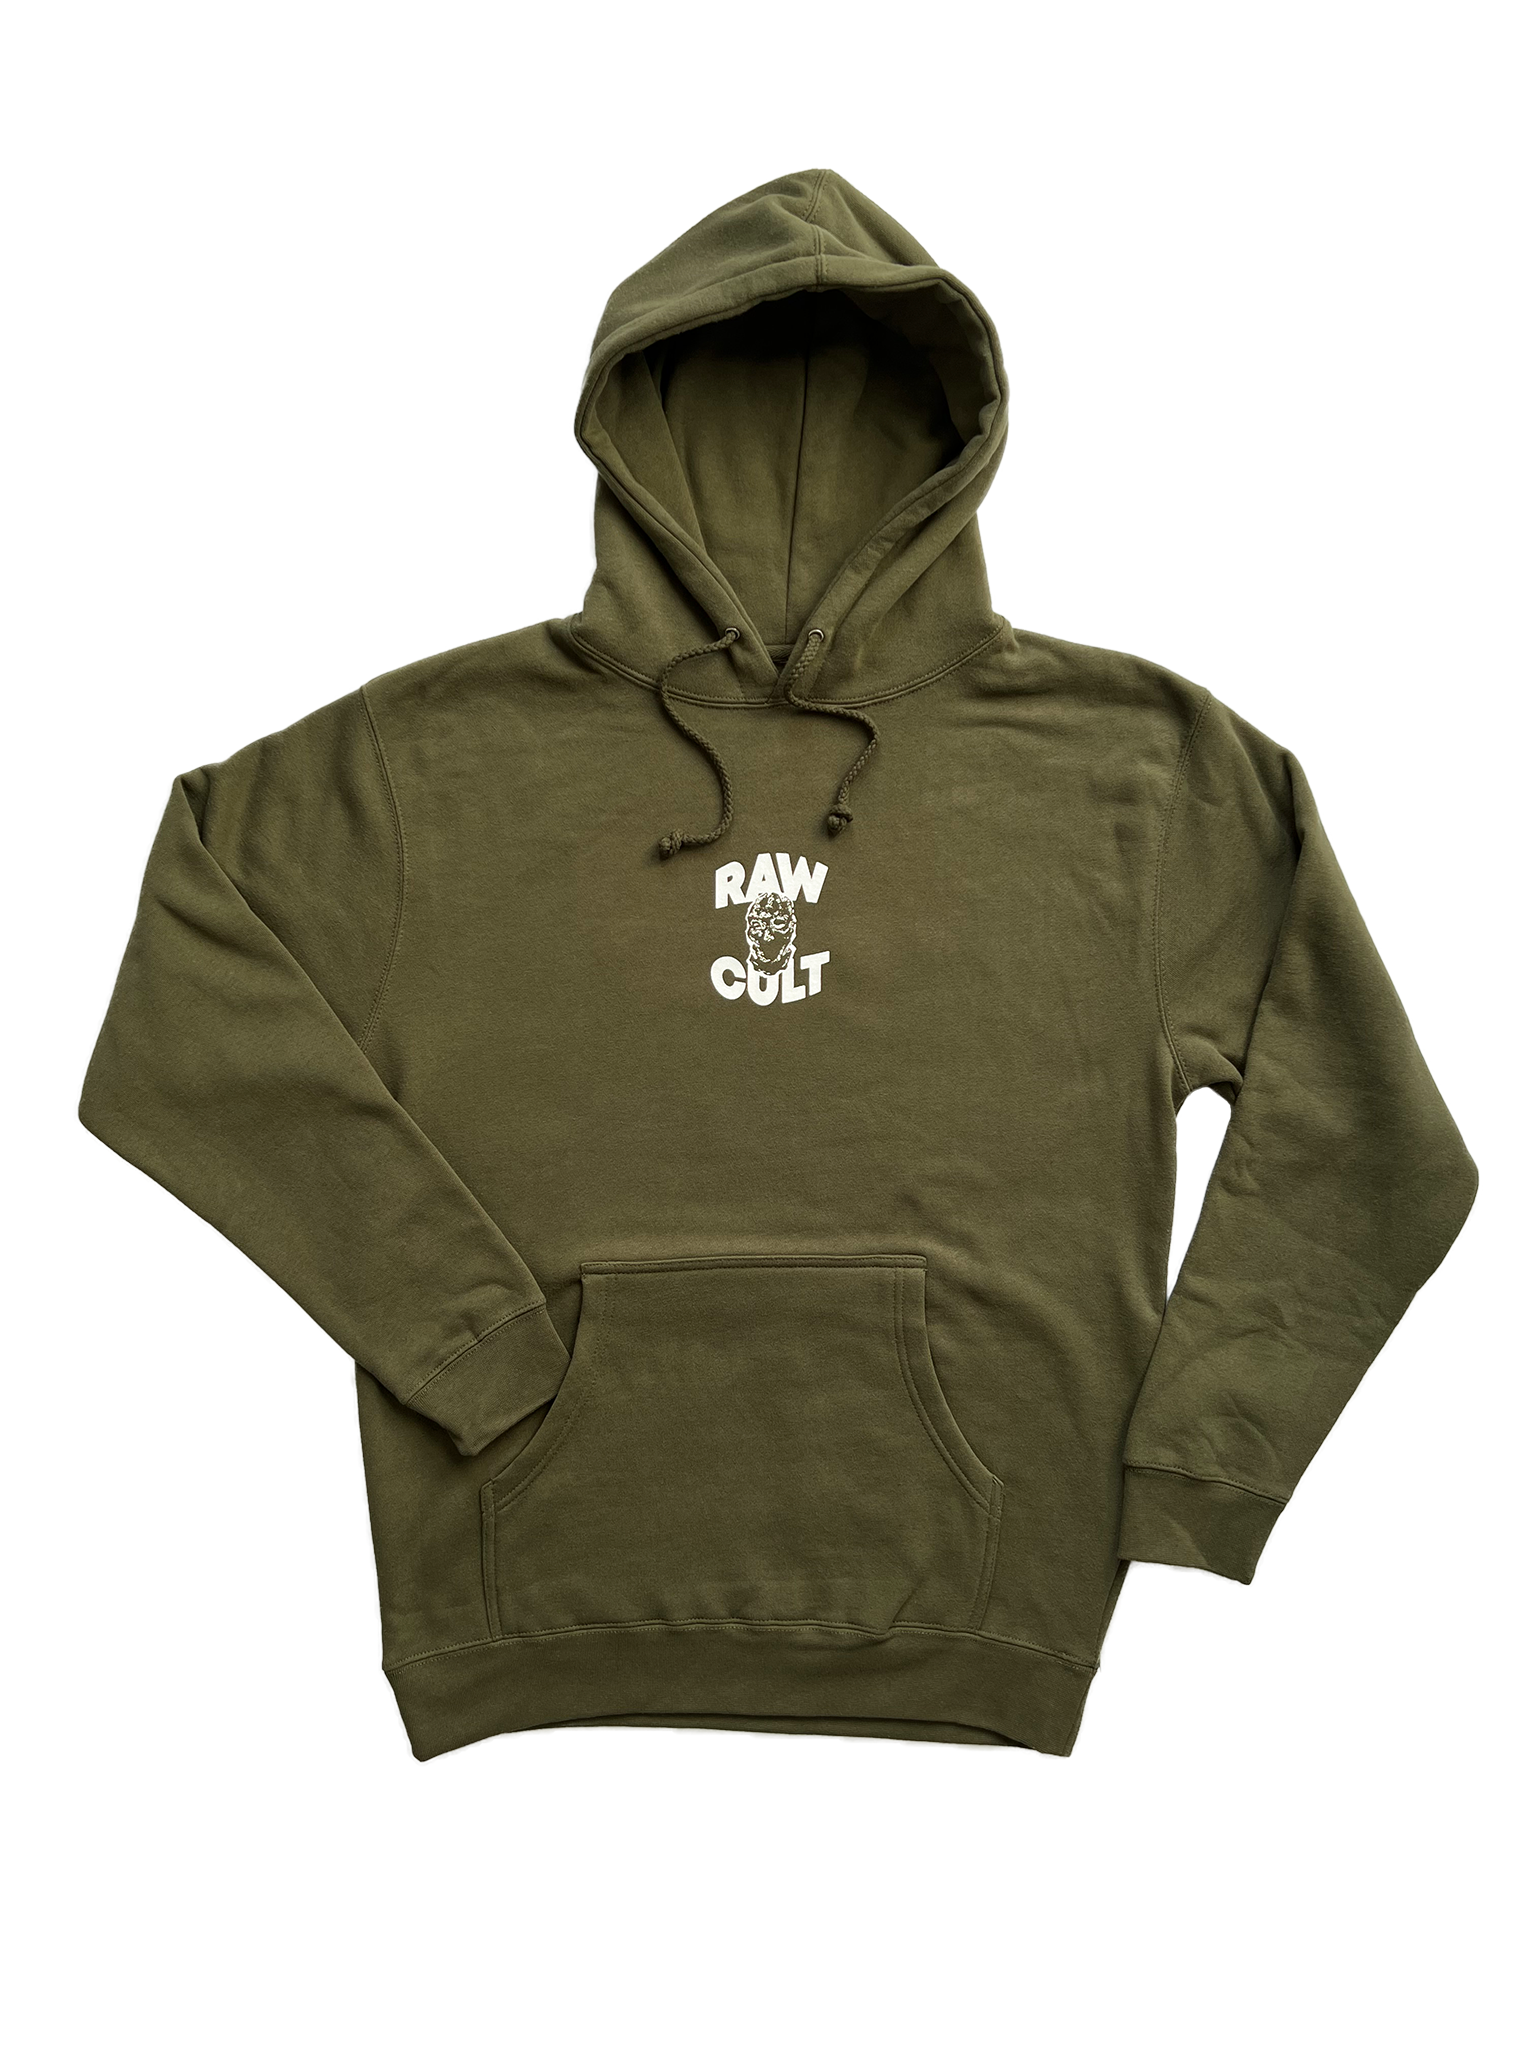 RAW CULT | Mask CULT Hoodie - White on Military Green